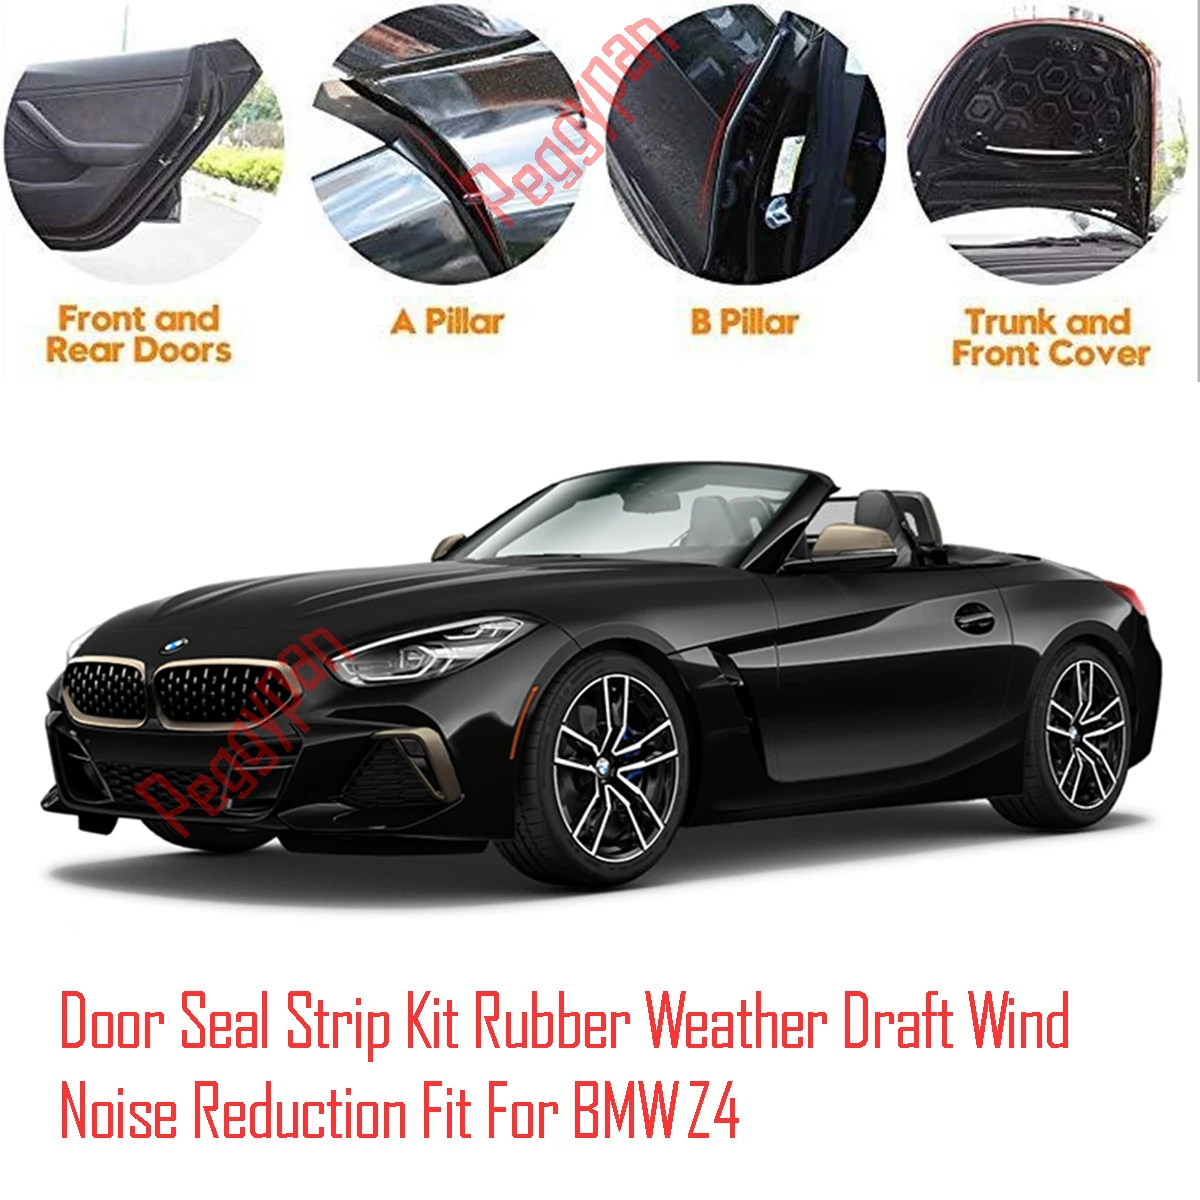 Door Seal Strip Kit Self Adhesive Window Engine Cover Soundproof Rubber Weather Draft Wind Noise Reduction Fit For BMW Z4